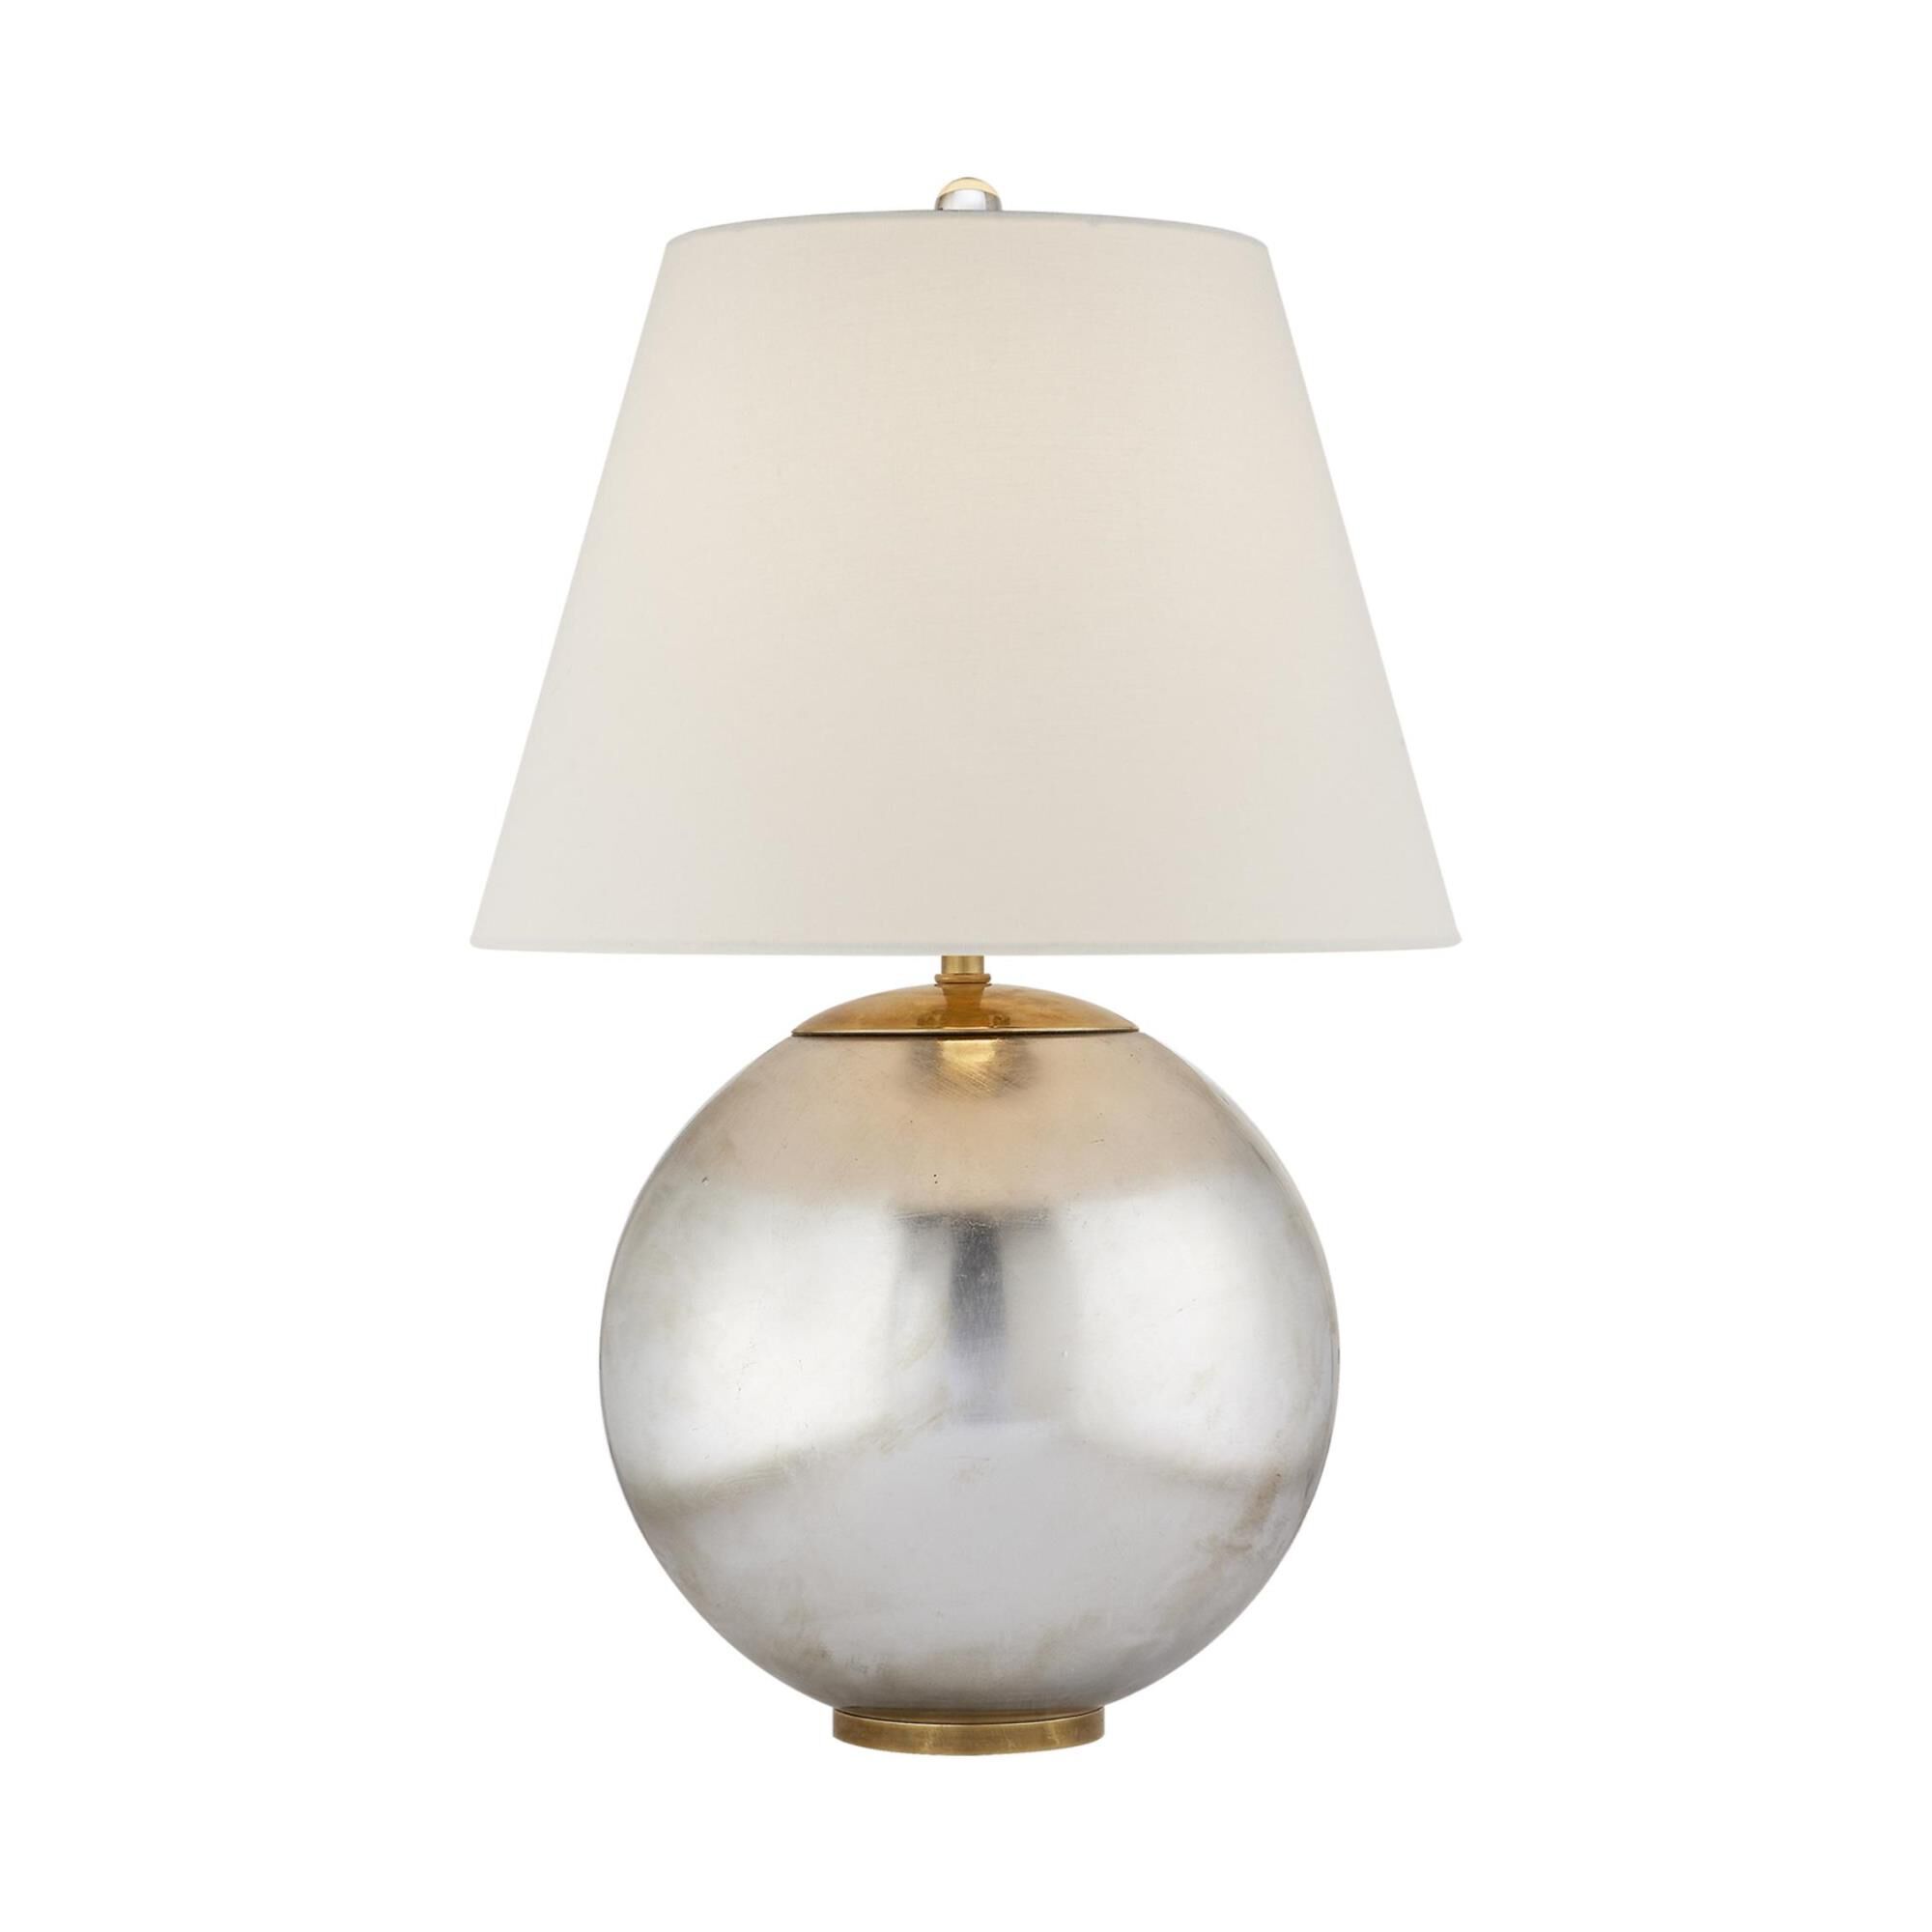 Aerin Morton 24 Inch Table Lamp by Visual Comfort and Co. | Capitol Lighting 1800lighting.com